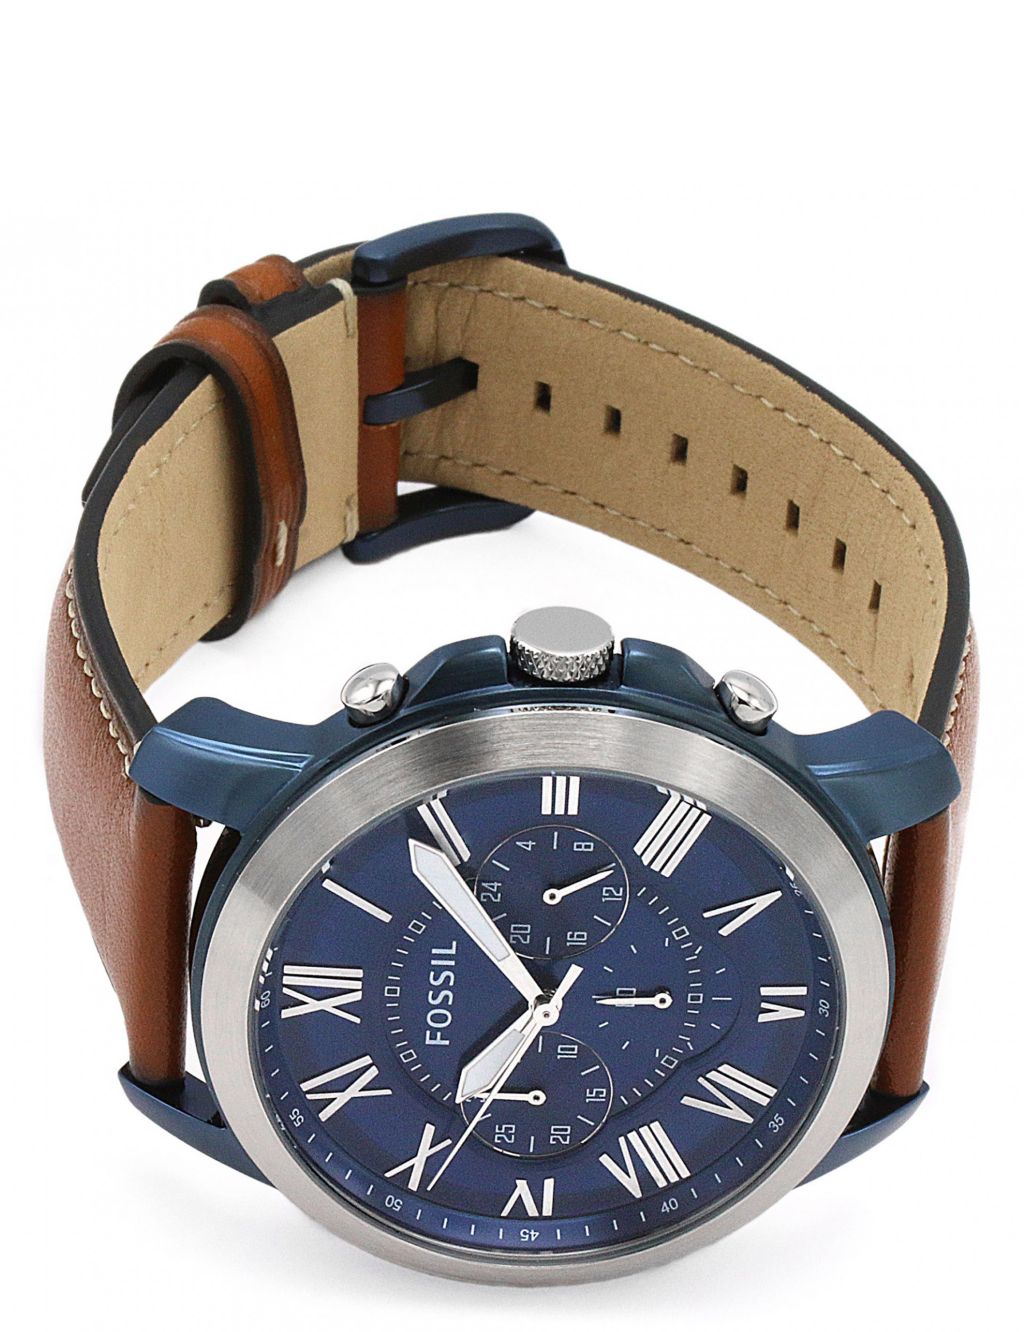 Fossil Grant Brown Leather Chronograph Quartz Watch image 3